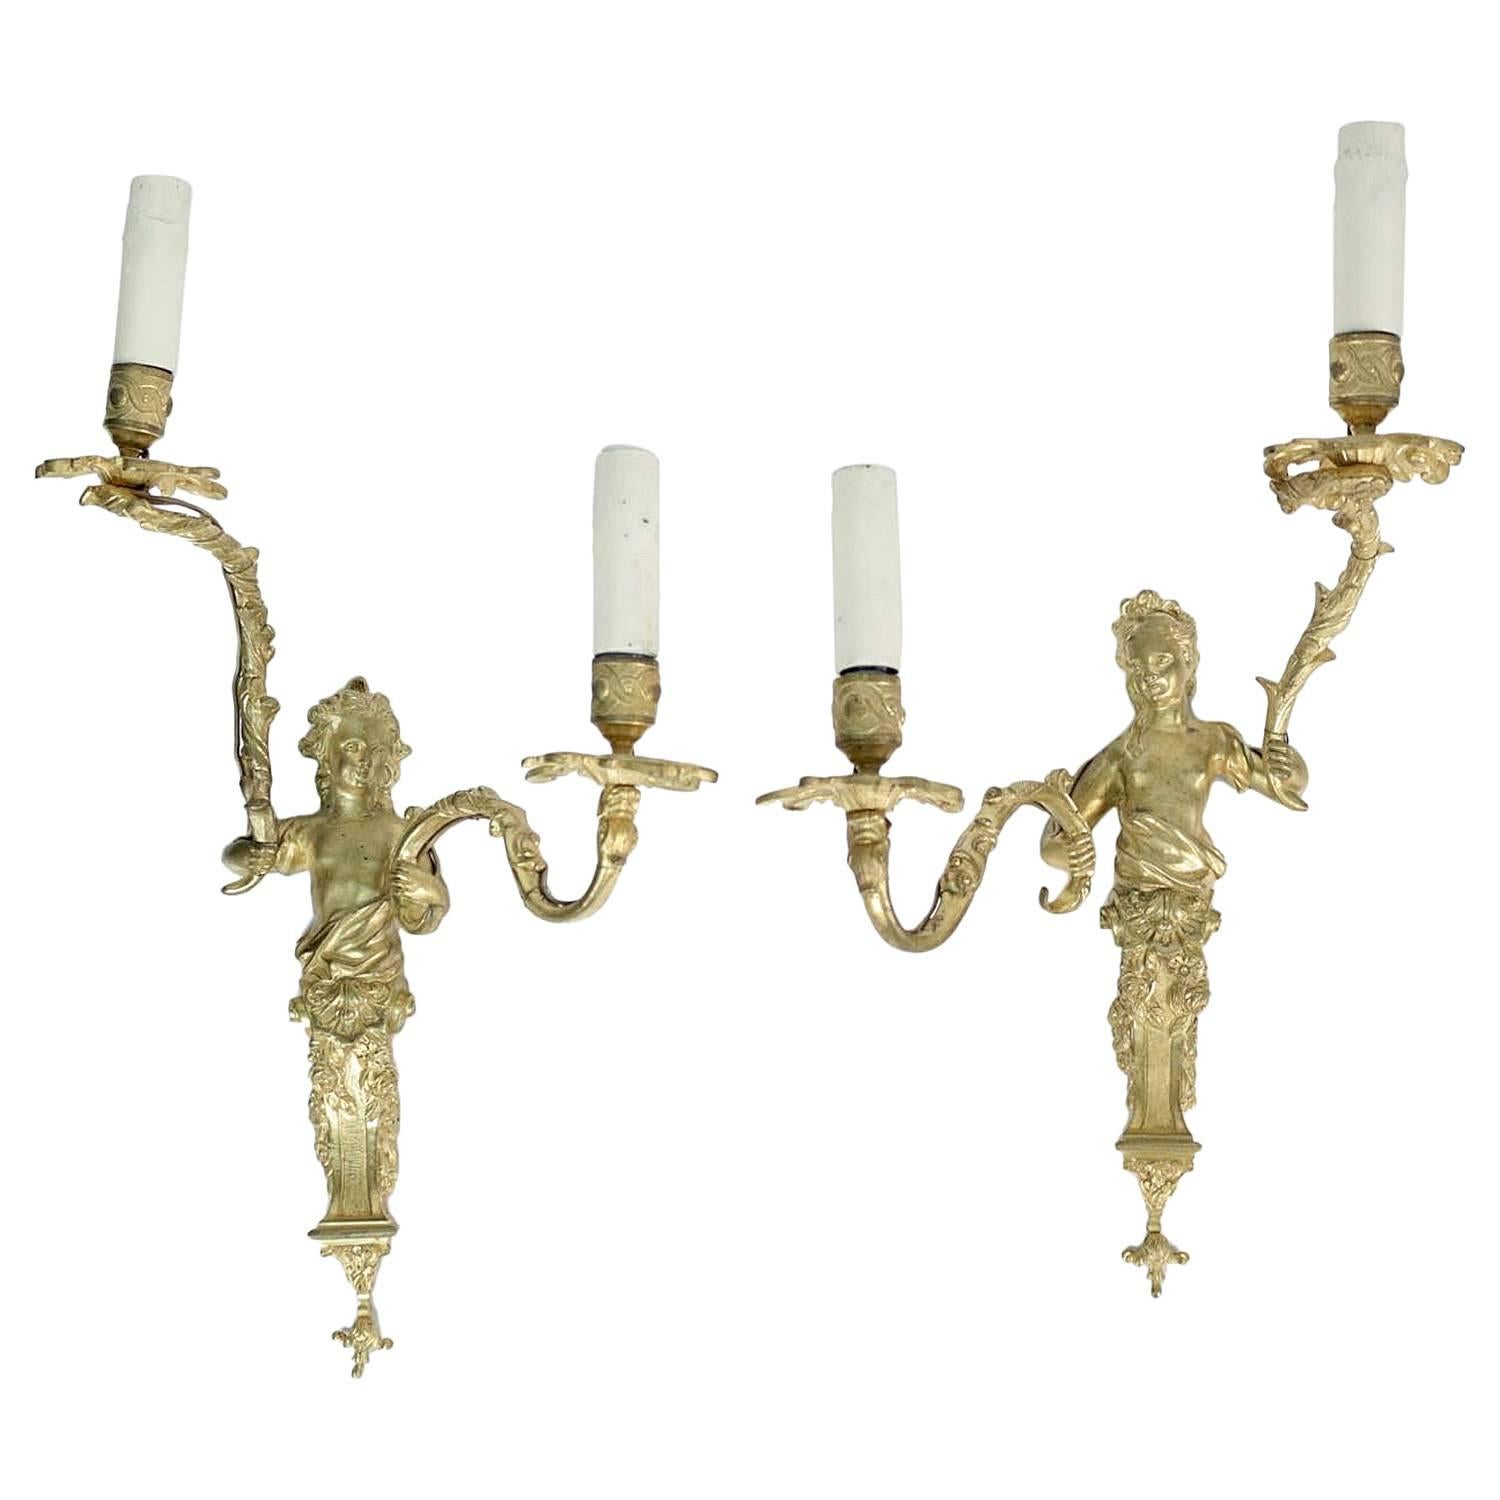 Pair of French Regence Style Ormolu Sconces, Mid-19h Century For Sale